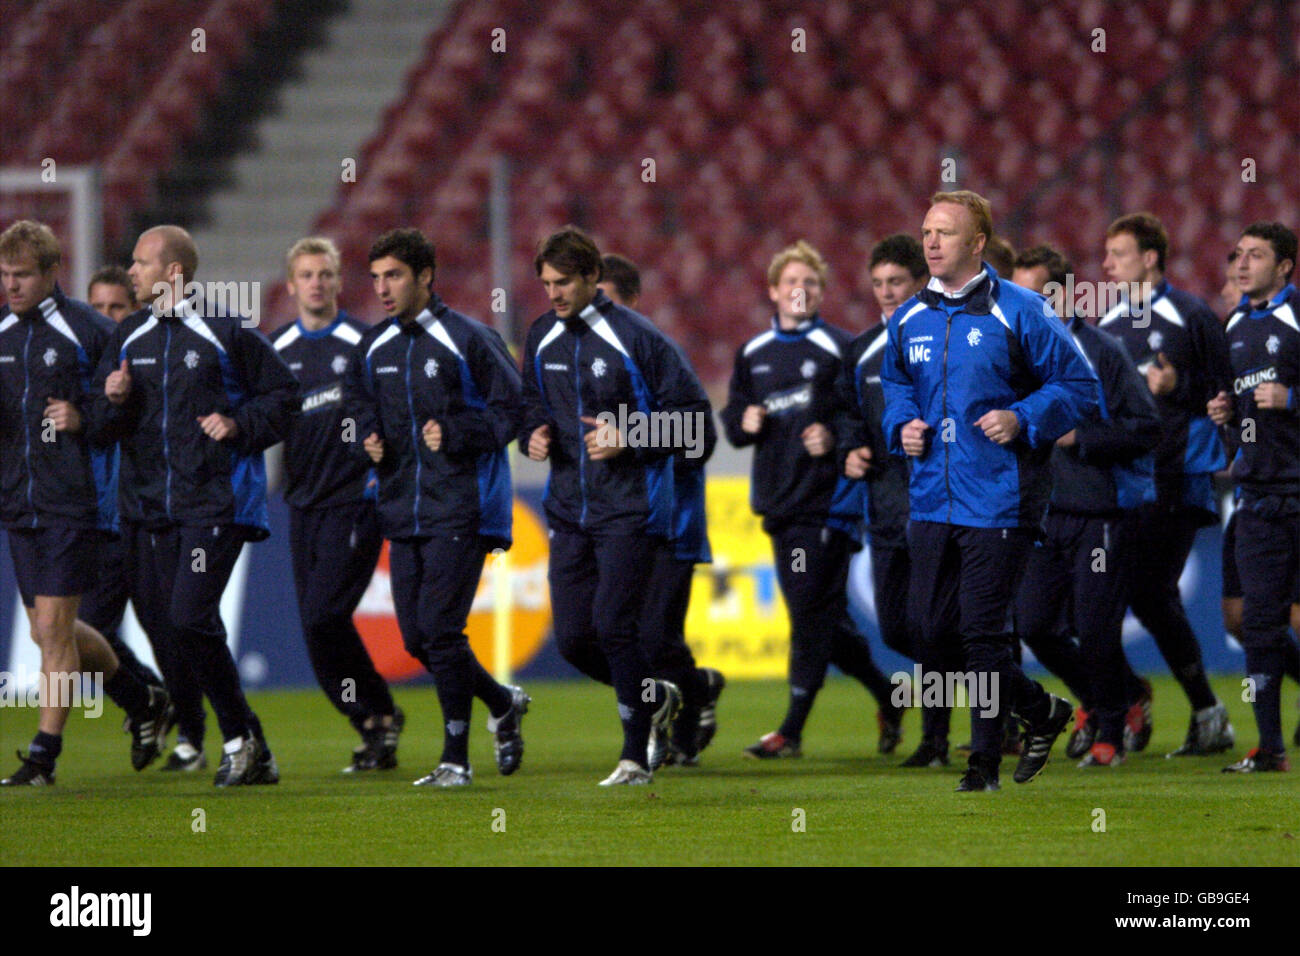 Soccer - UEFA Champions League - Group E - VFB Stuttgart v Rangers. Rangers' manager Alex McLeish keeps tabs on his players during training Stock Photo